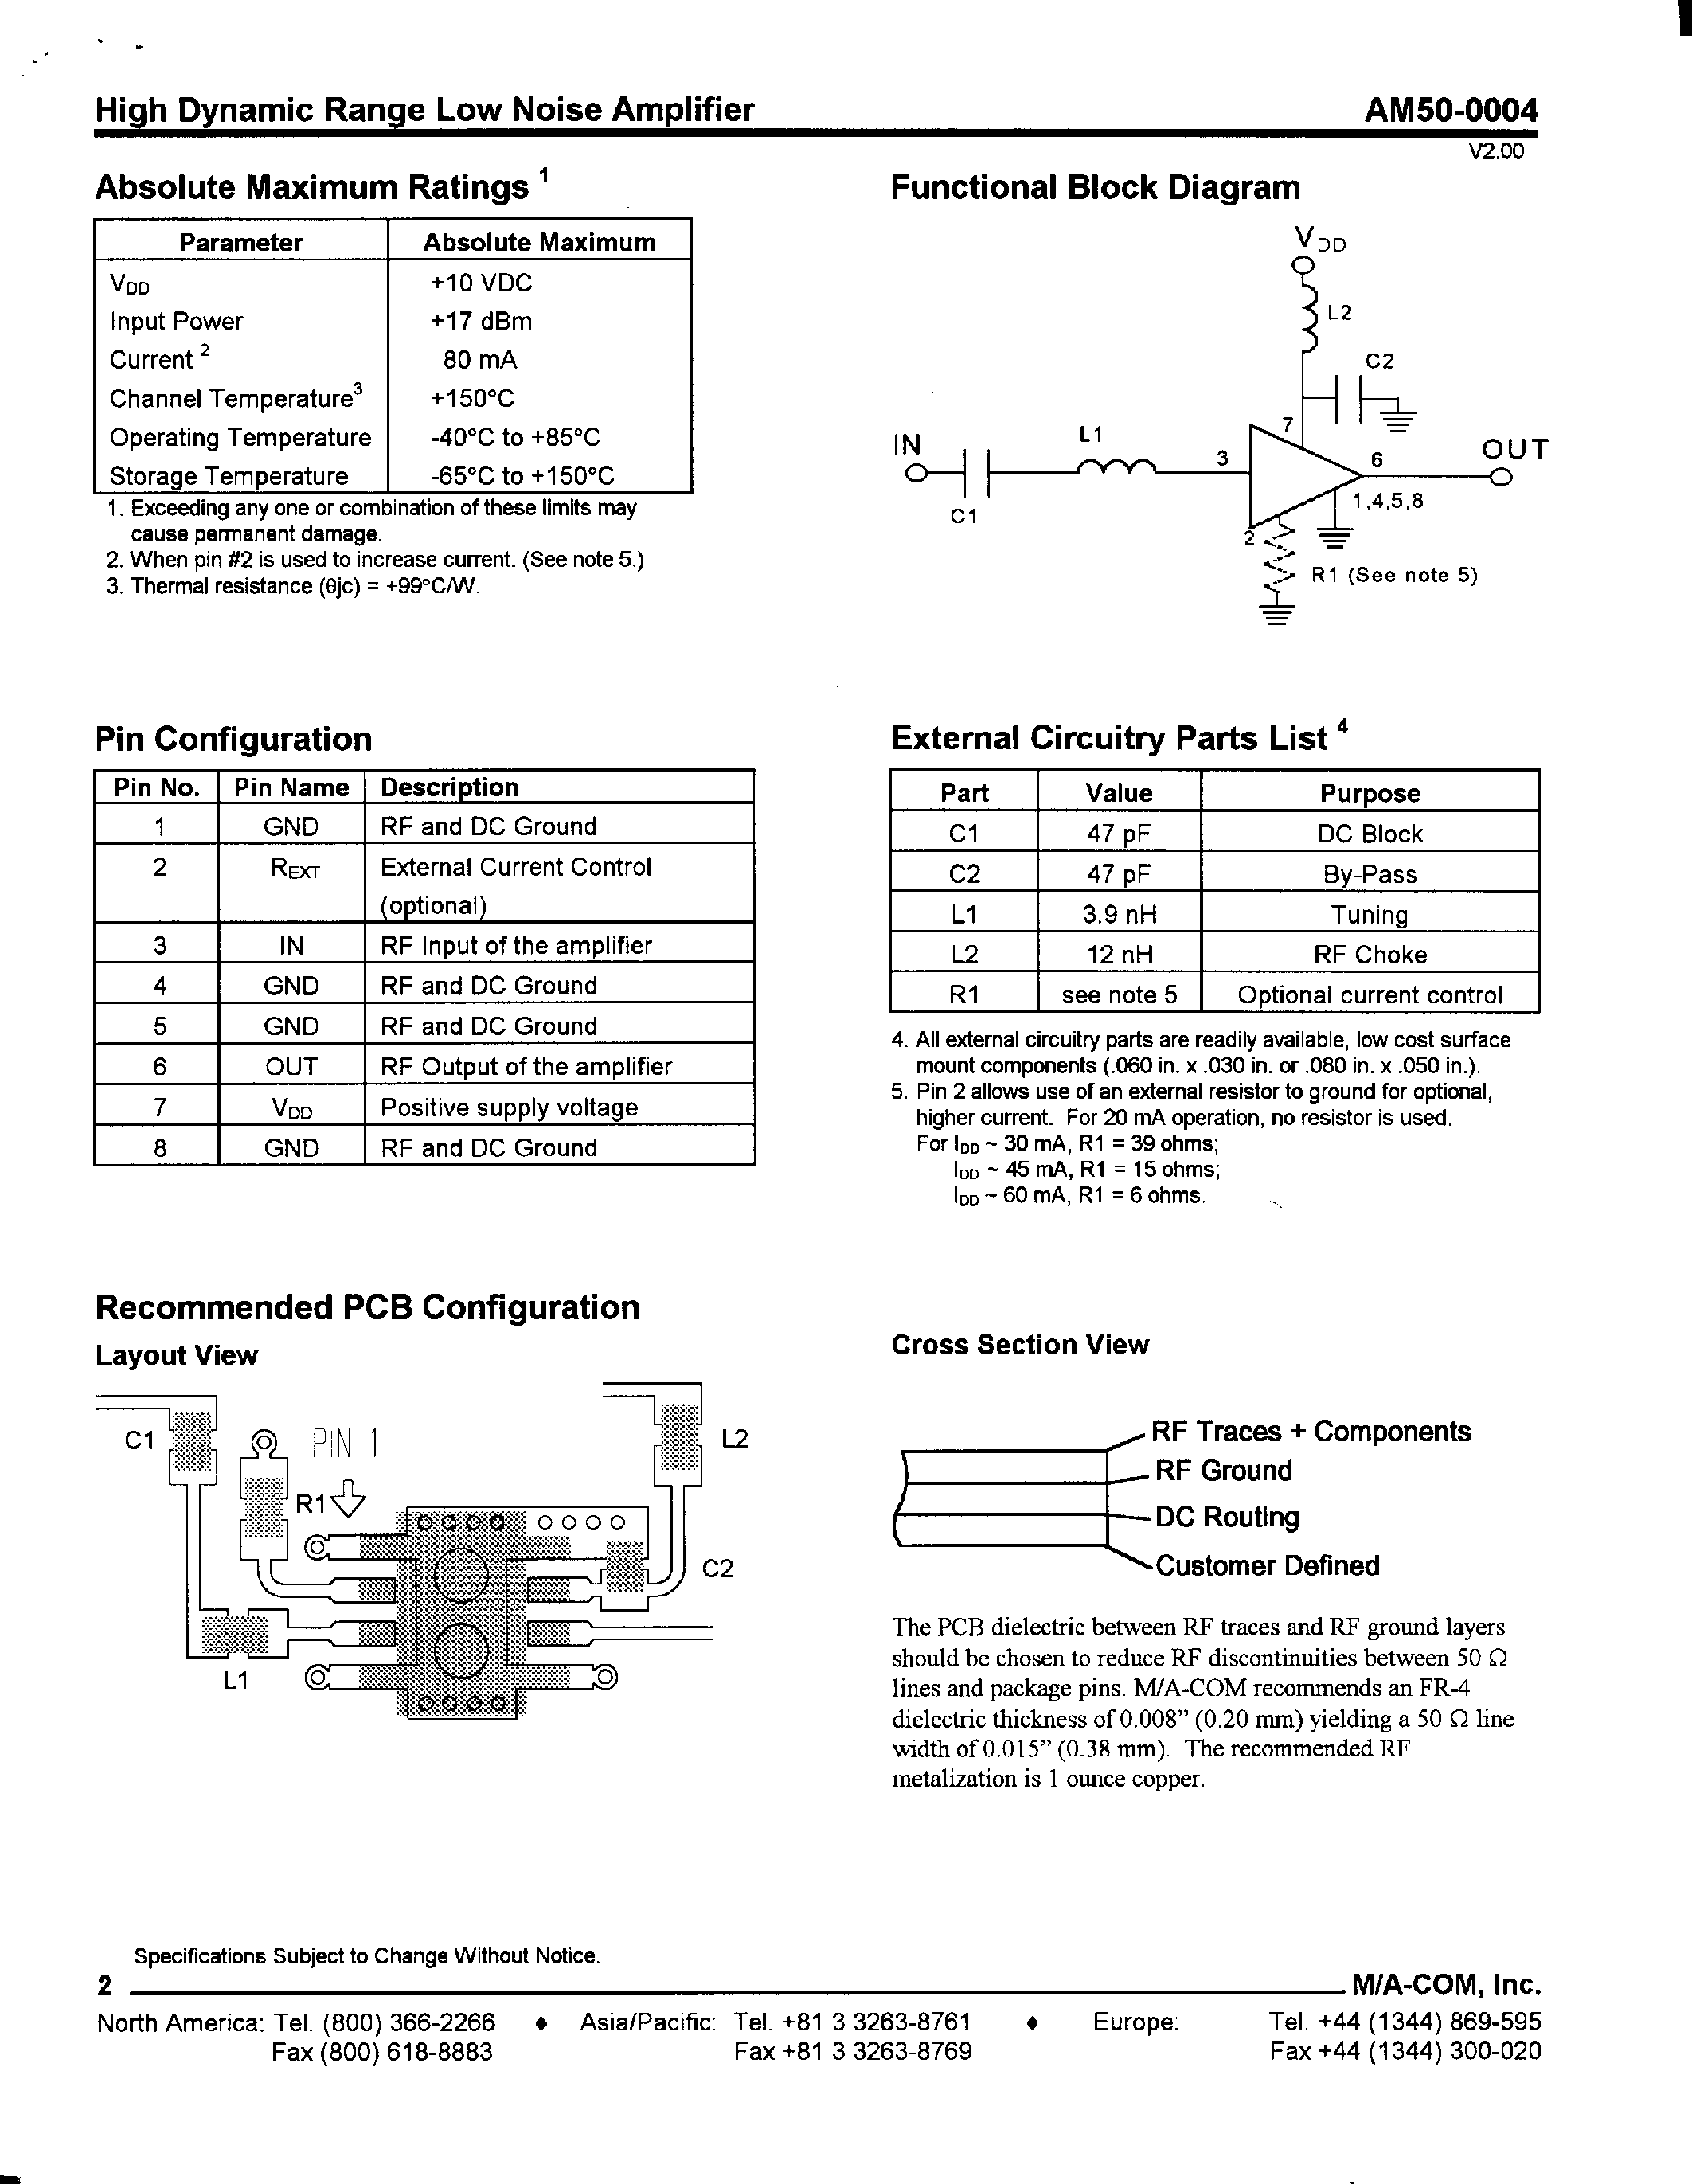 Datasheet AM50-0004RTR - High Dynamic Range Low Noise Amplifier 1400-2000 MHz page 2